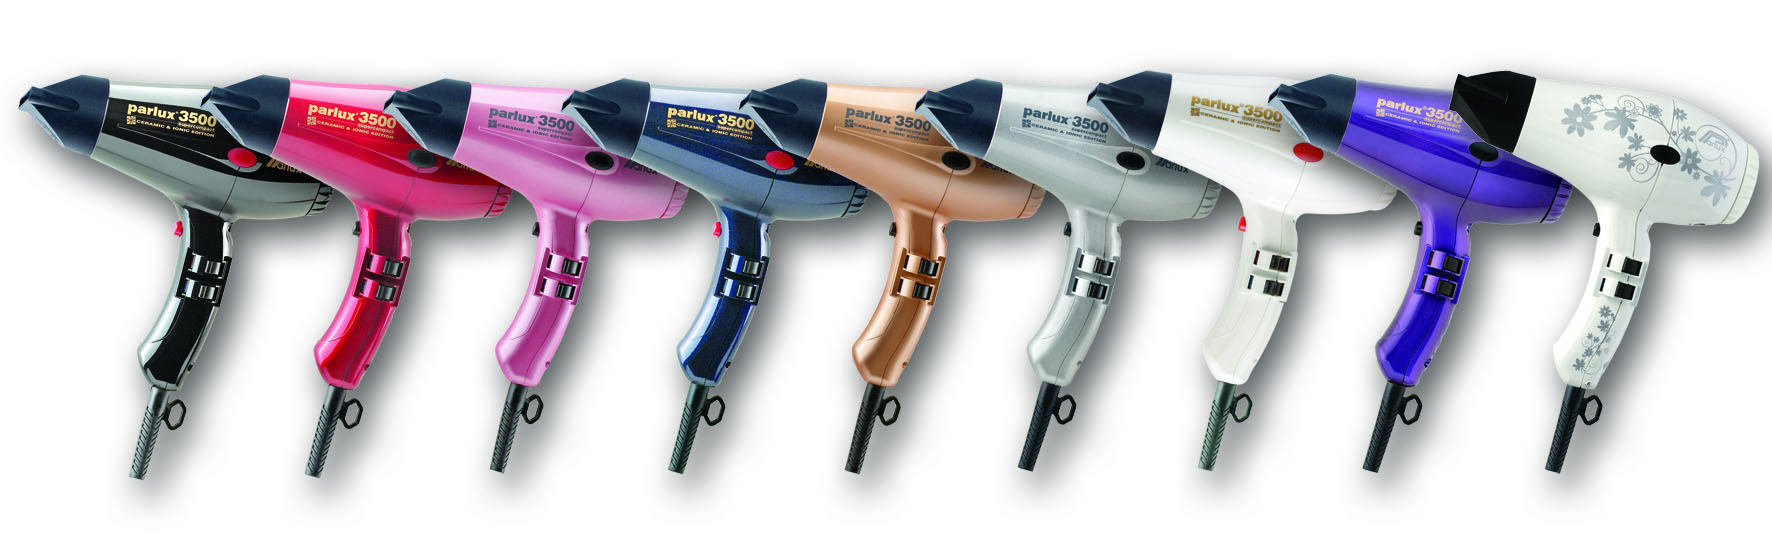 Parlux 3500 SuperCompact Ceramic & Ionic Dryer